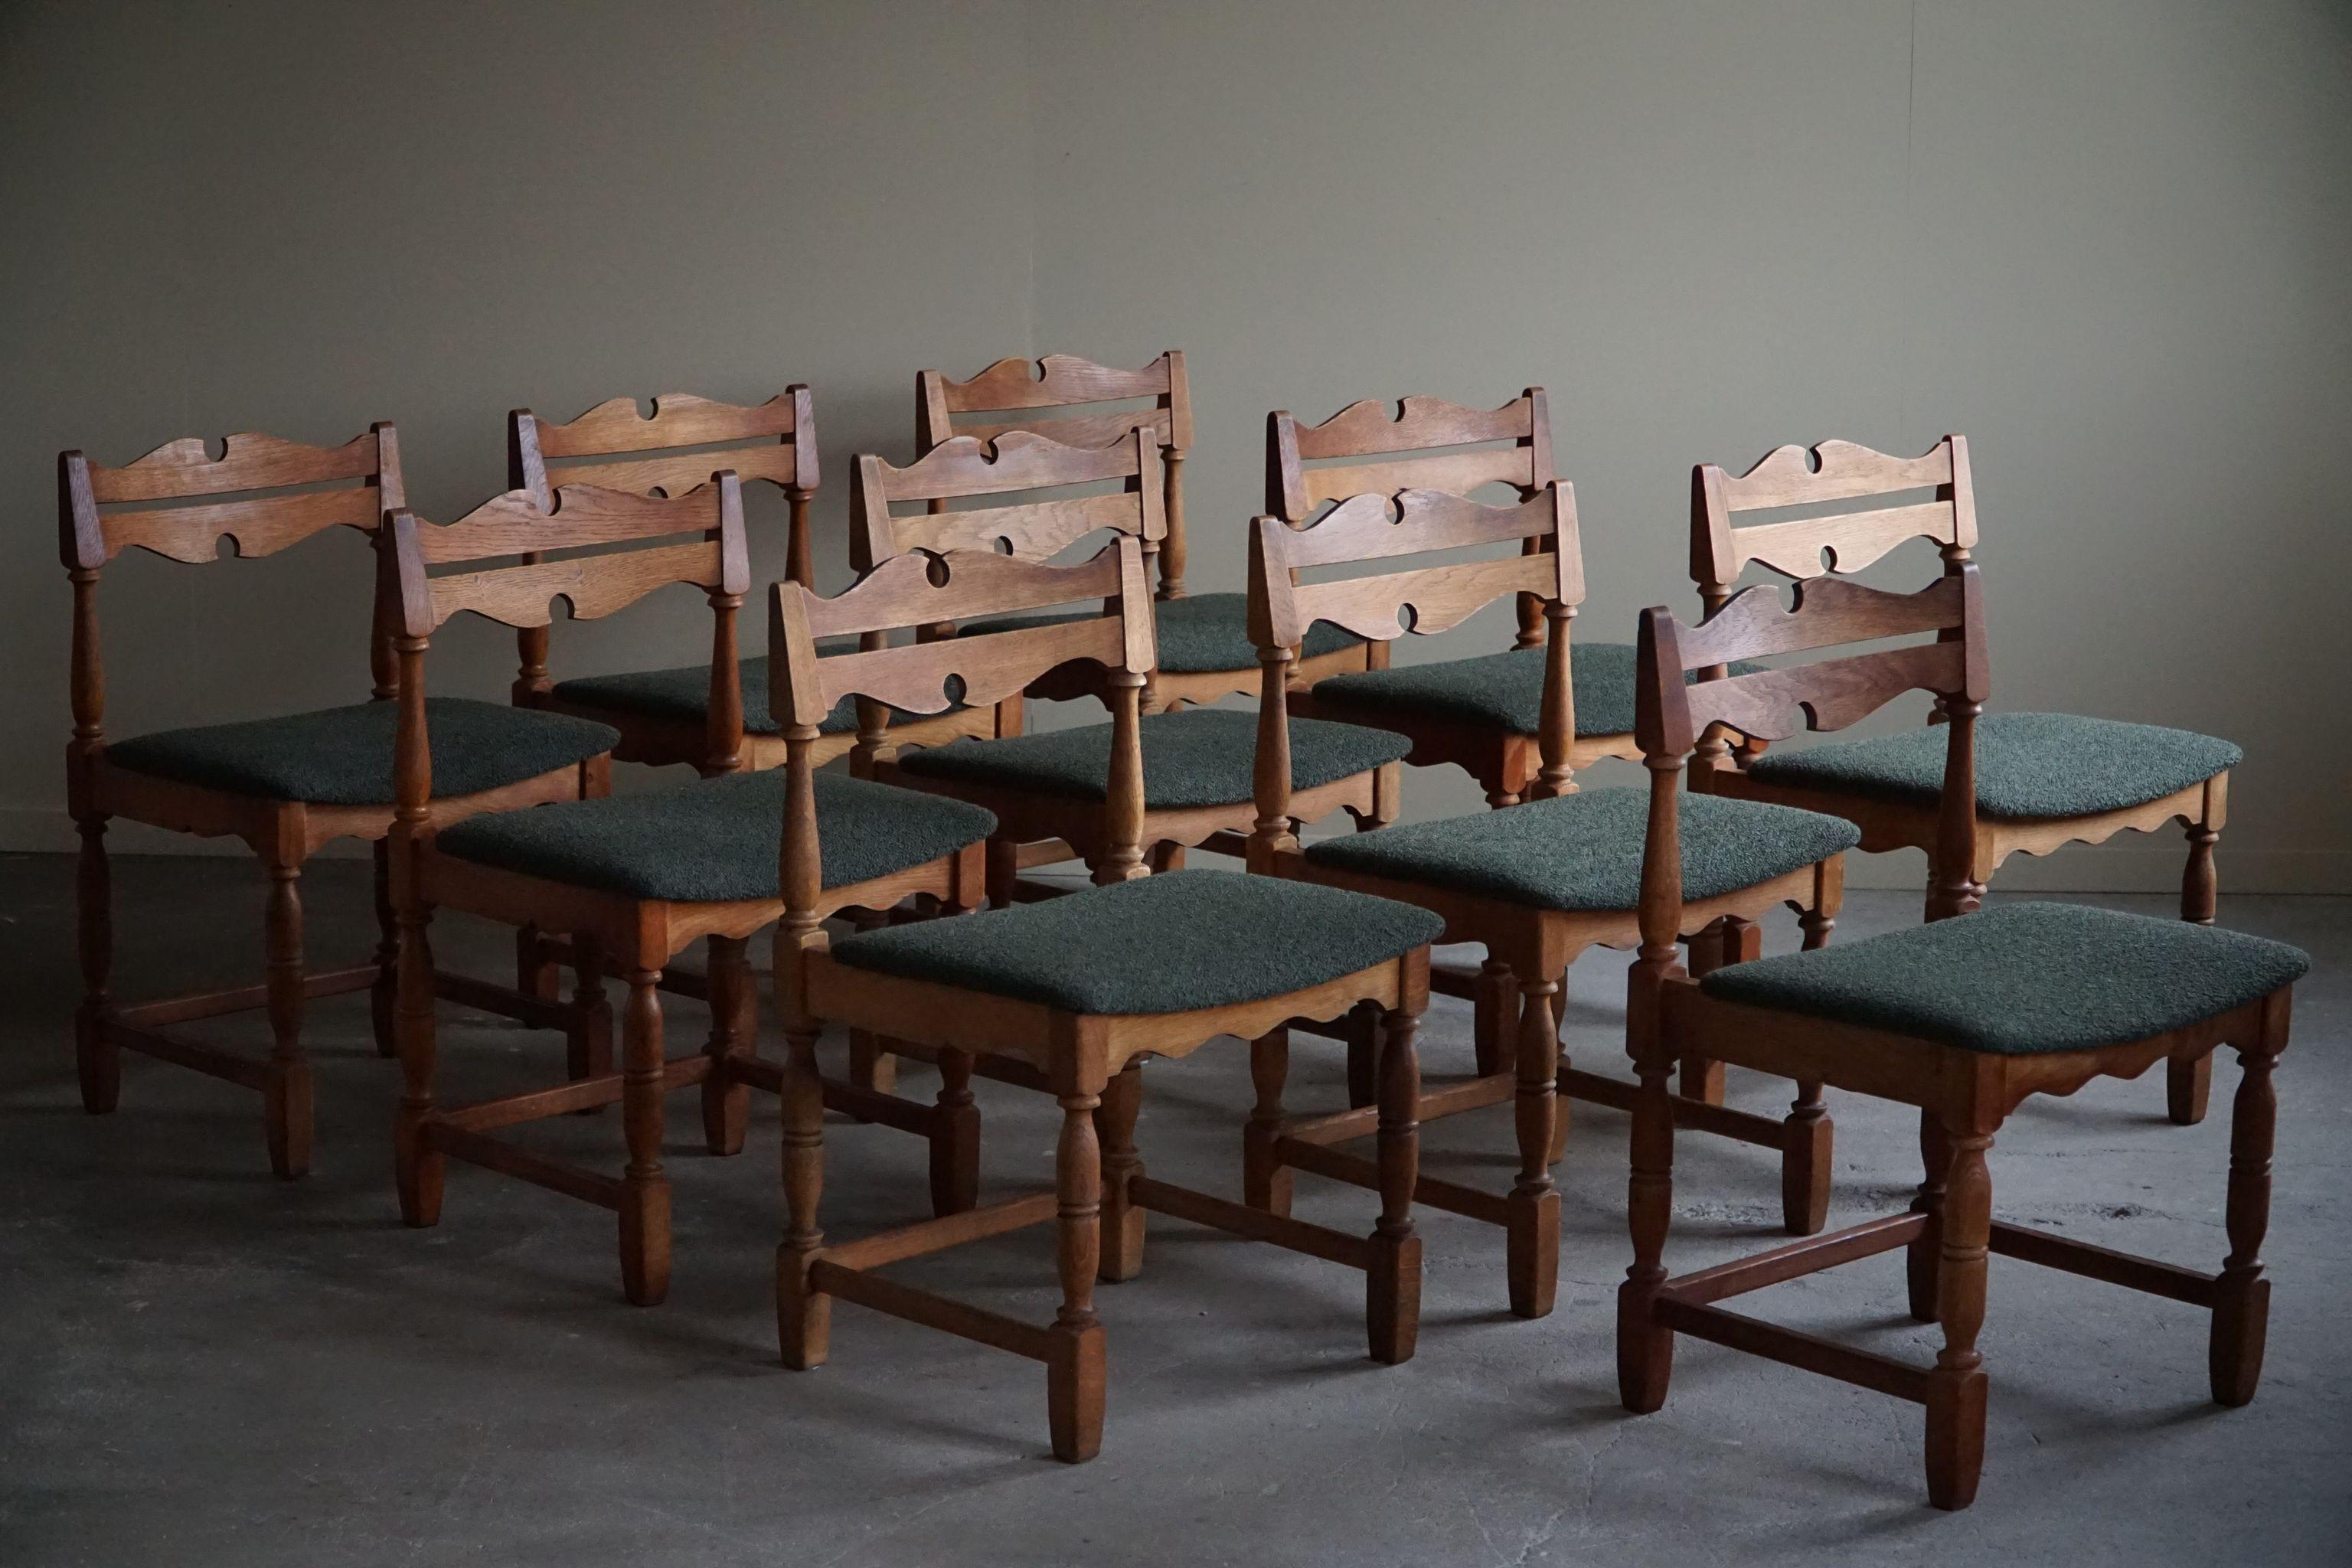 A classic set of 10 dining chairs in solid oak, made in the style of Henning (Henry) Kjærnulf. Crafted by a Danish Cabinetmaker in the 1960s. Seats reupholstered in a green bouclé. 

This sculptural brutalist set will complement many interior